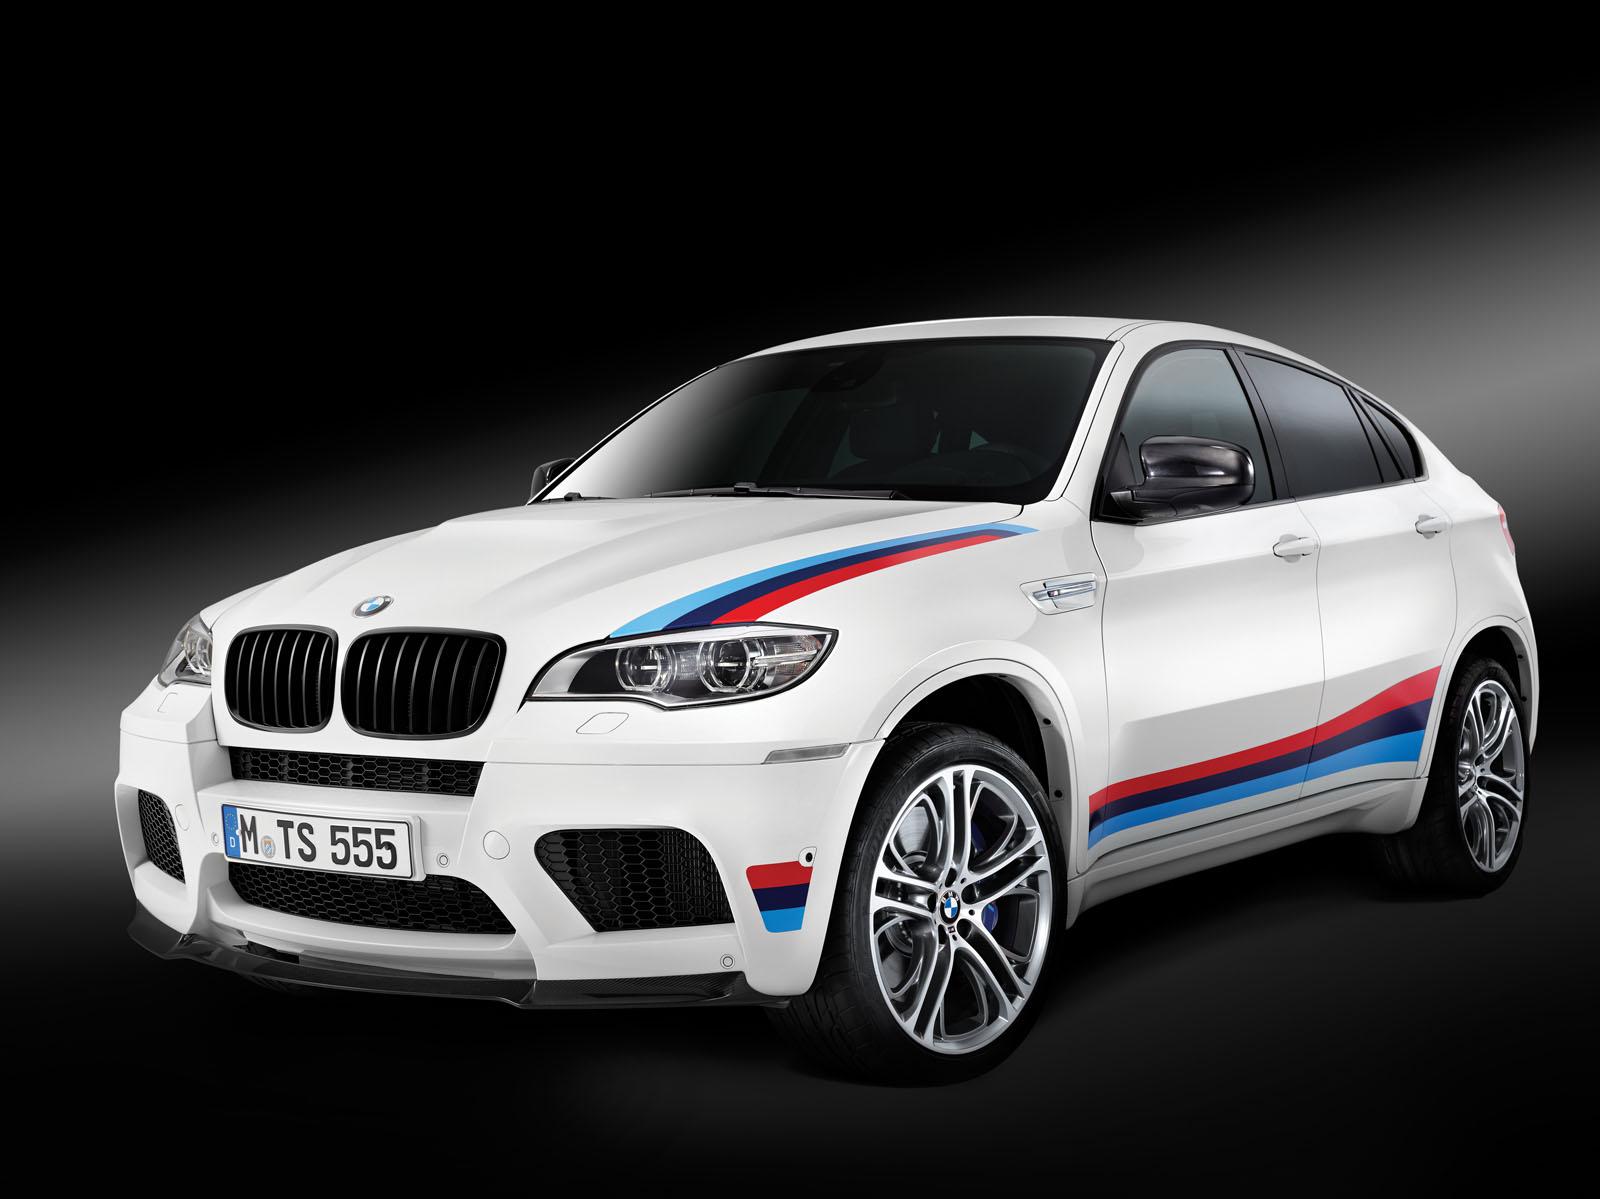 2014 BMW X6 M Design Edition Launched